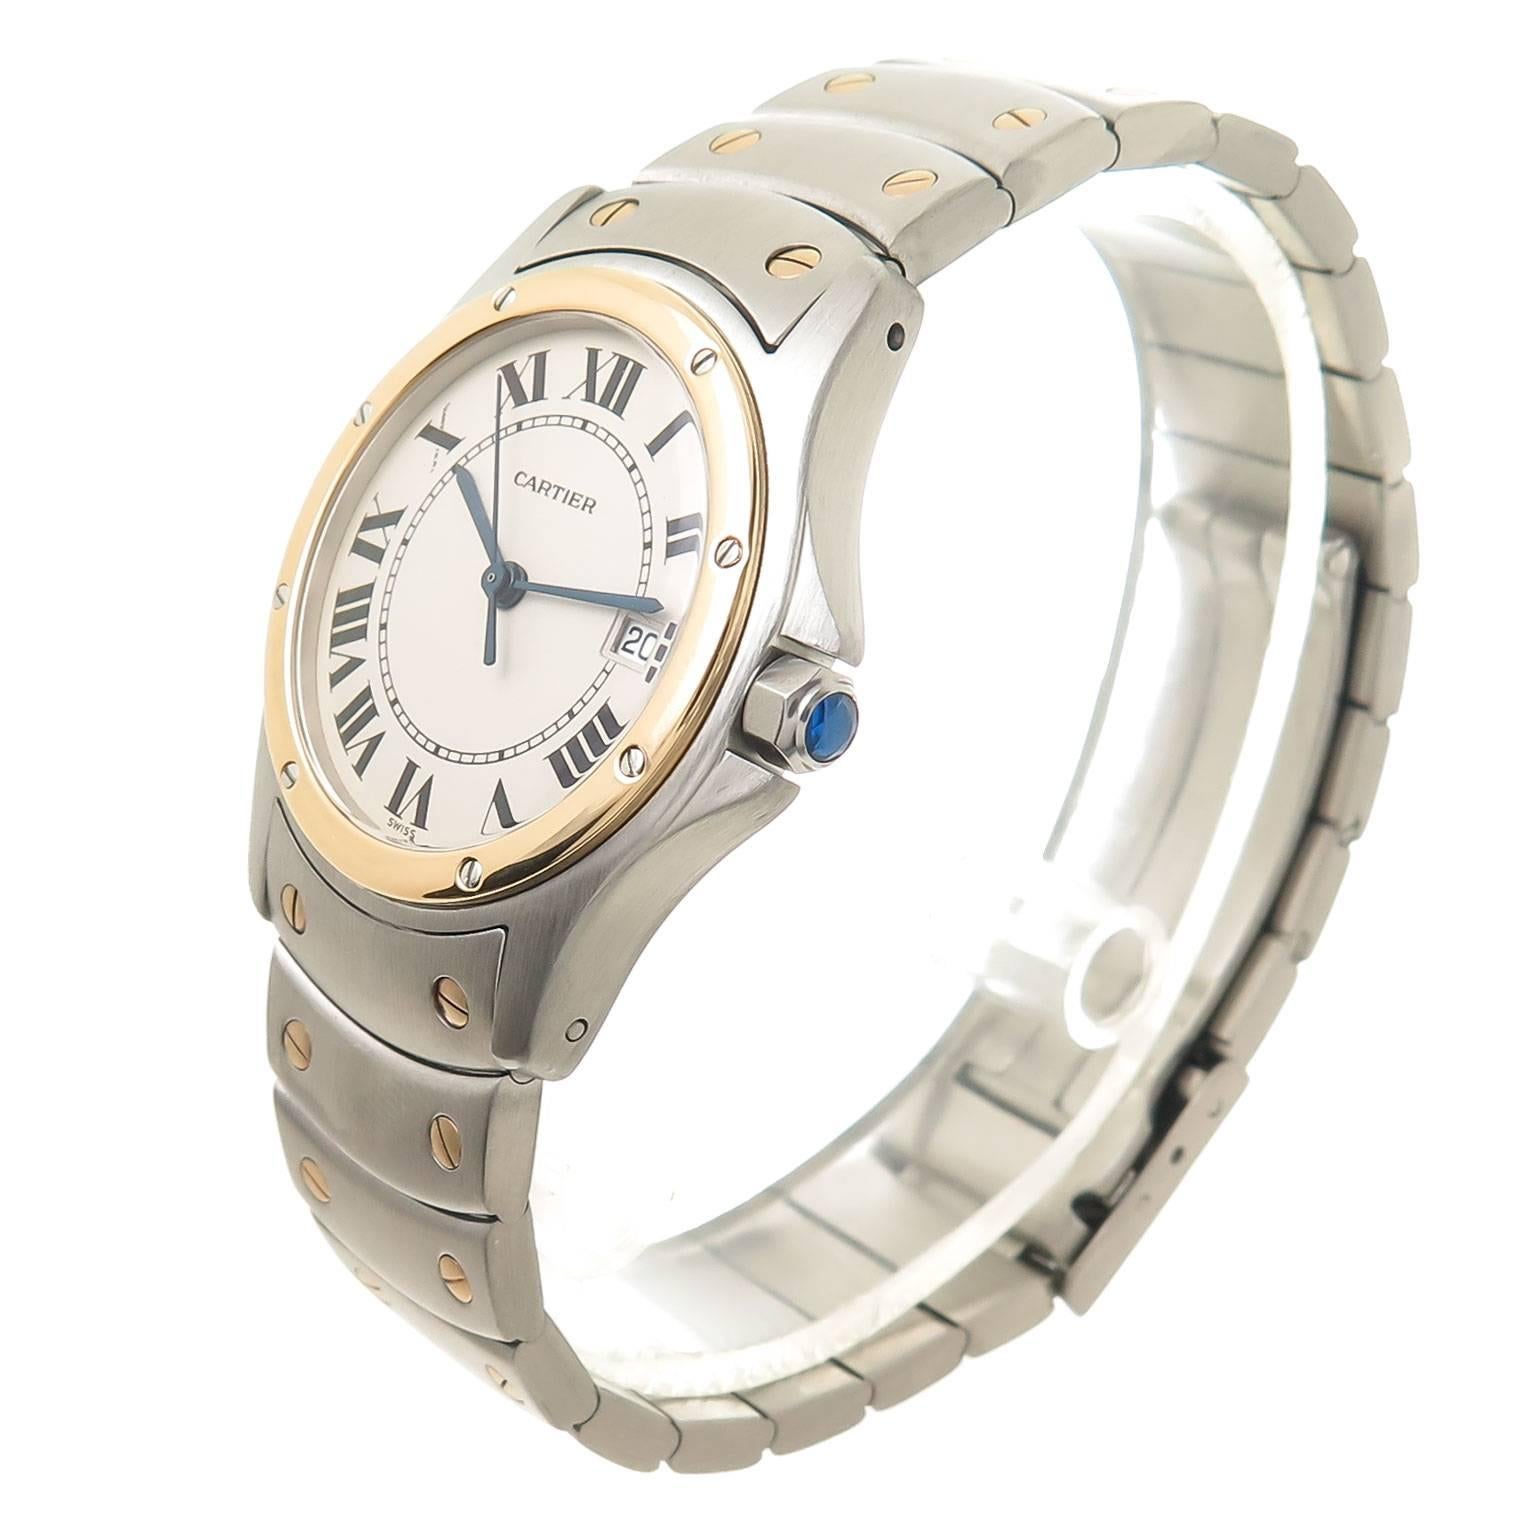 Circa 2005 Cartier Santos Ronde Wrist watch, 29.5 MM Stainless steel Water resistant Case with 18K yellow Gold Bezel. Quartz Movement, White Dial with Black Roman Numerals, sweep seconds hand, calendar window at the 3 position, scratch resistant